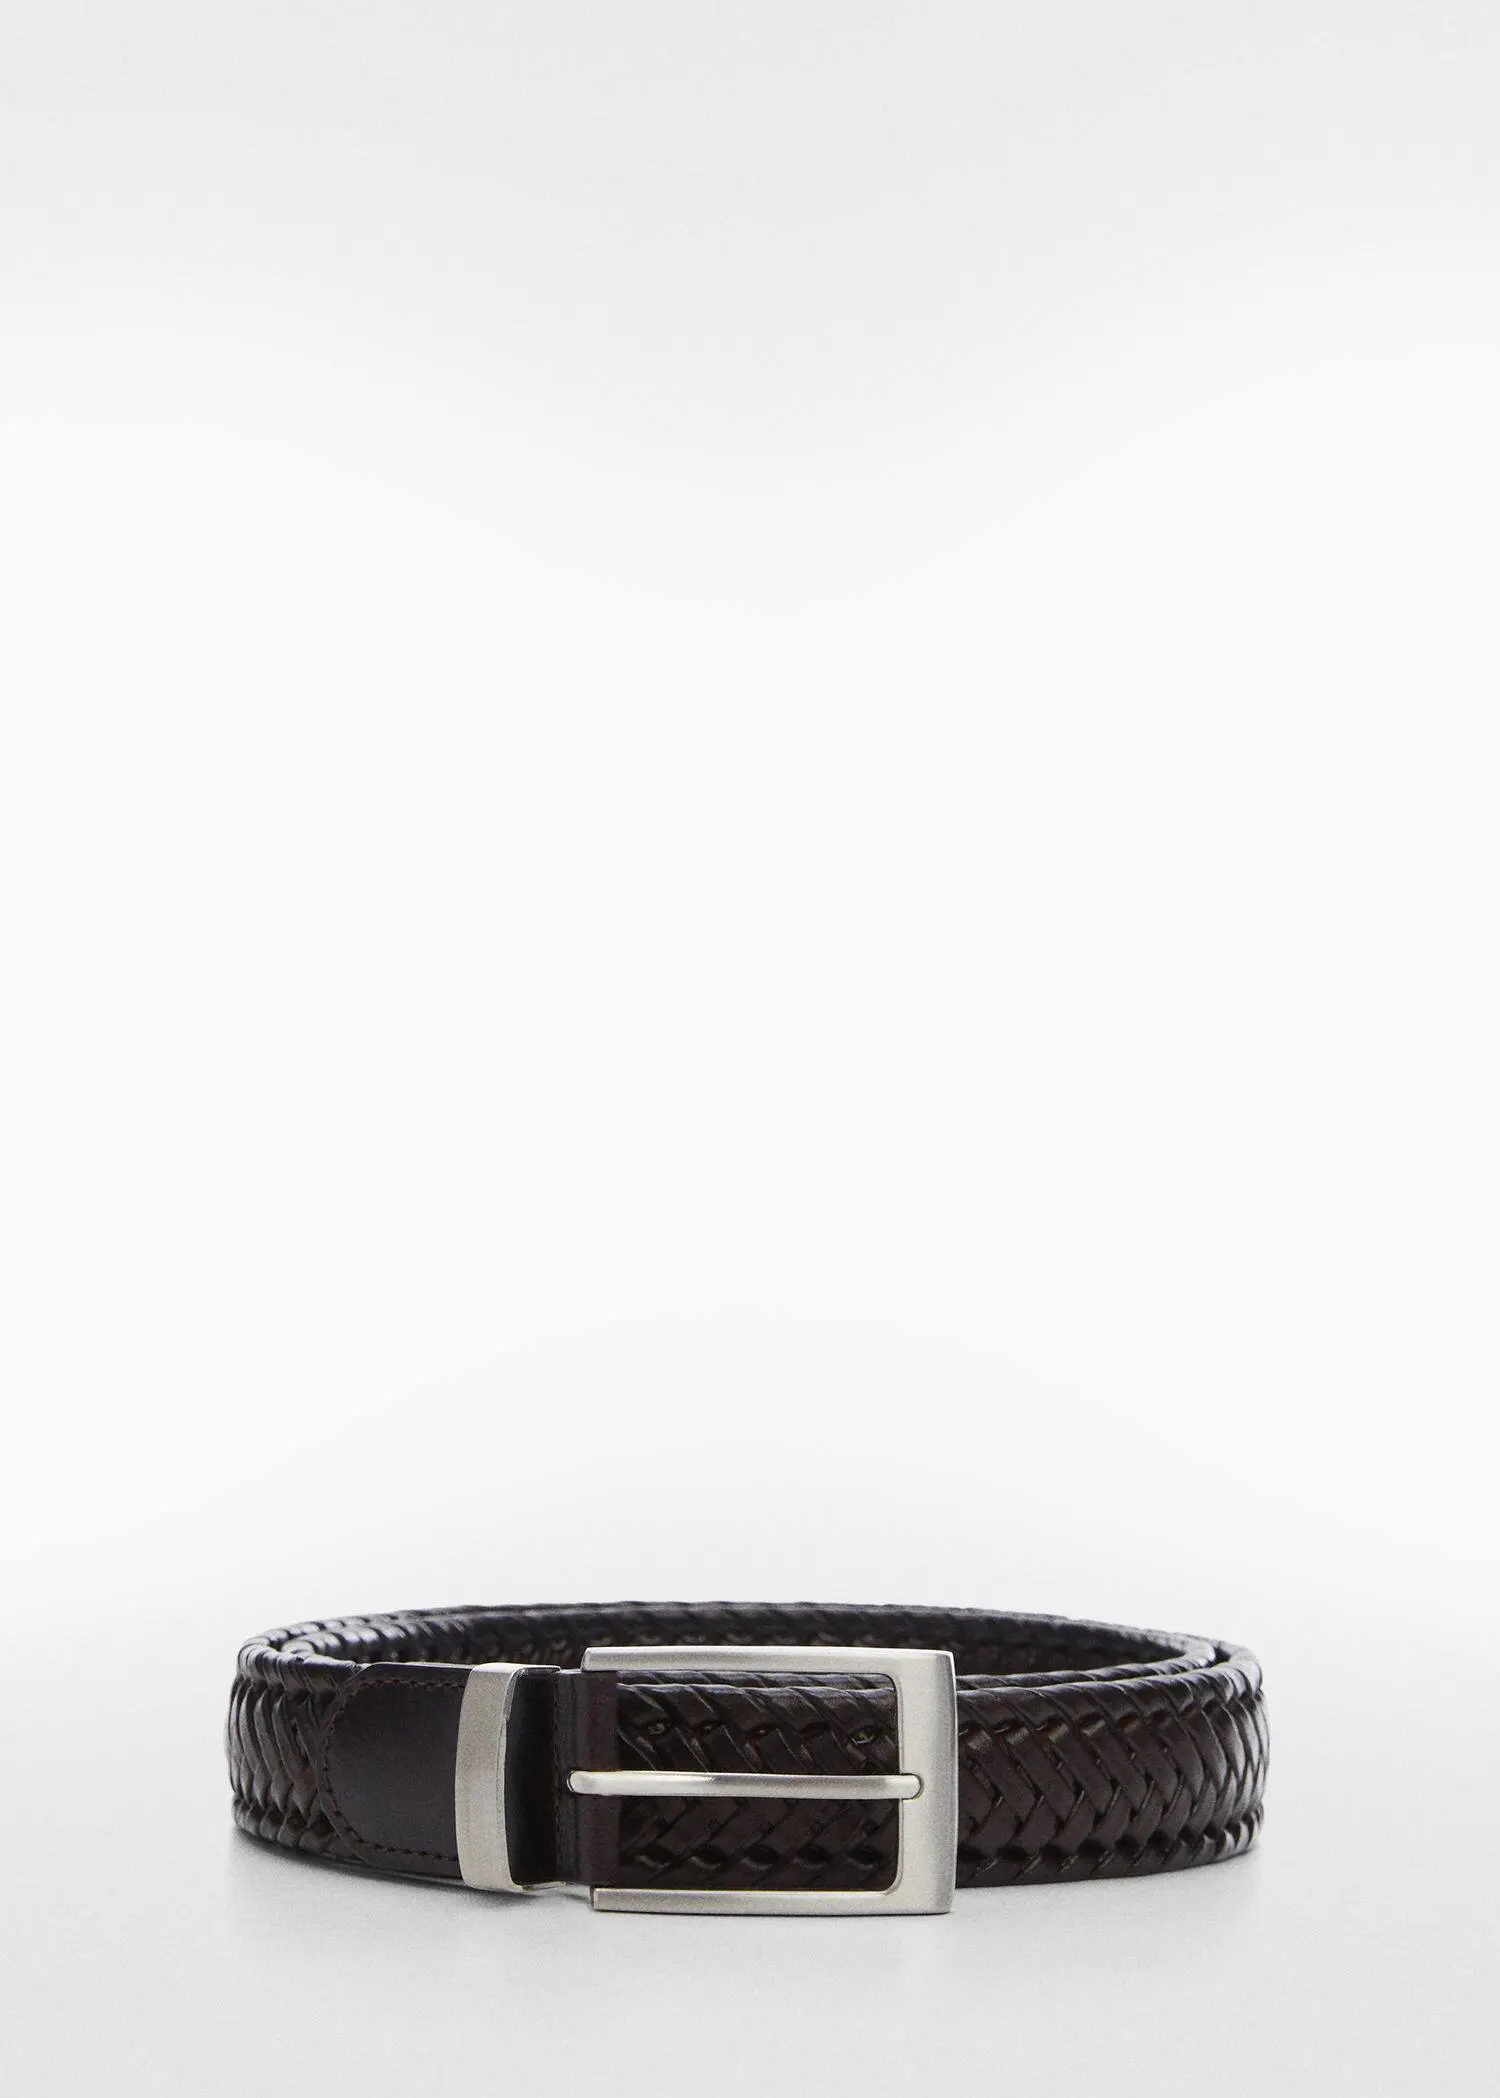 Mango Braided leather belt. a brown belt with a silver buckle on a white background 